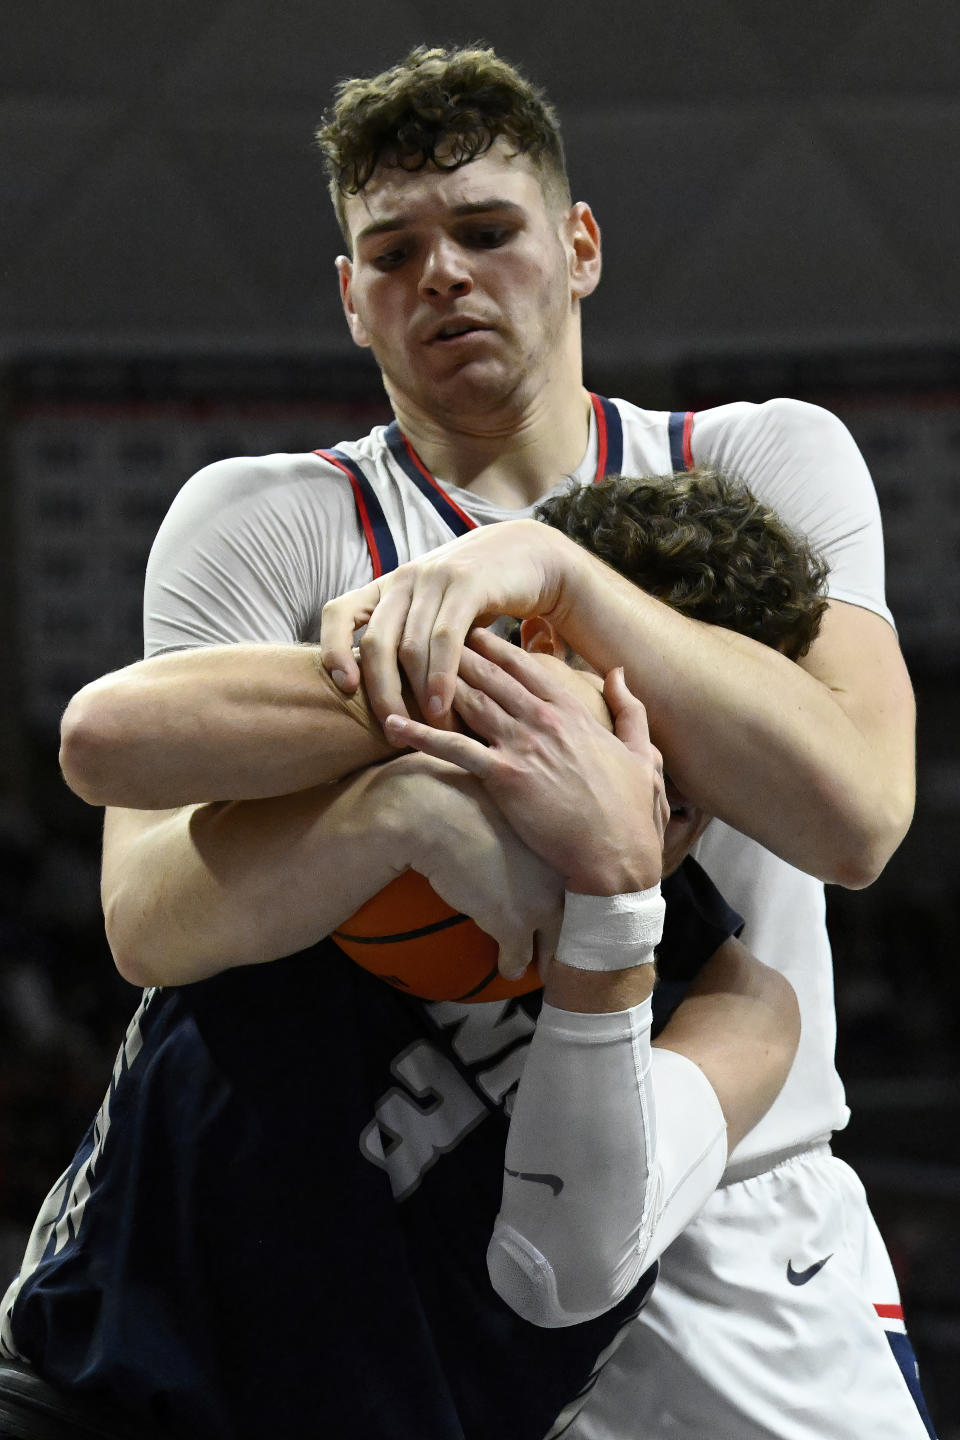 UConn center Donovan Clingan, top, and New Hampshire forward Jaxson Baker, bottom, fight for a rebound in the second half of an NCAA college basketball game, Monday, Nov. 27, 2023, in Storrs, Conn. (AP Photo/Jessica Hill)